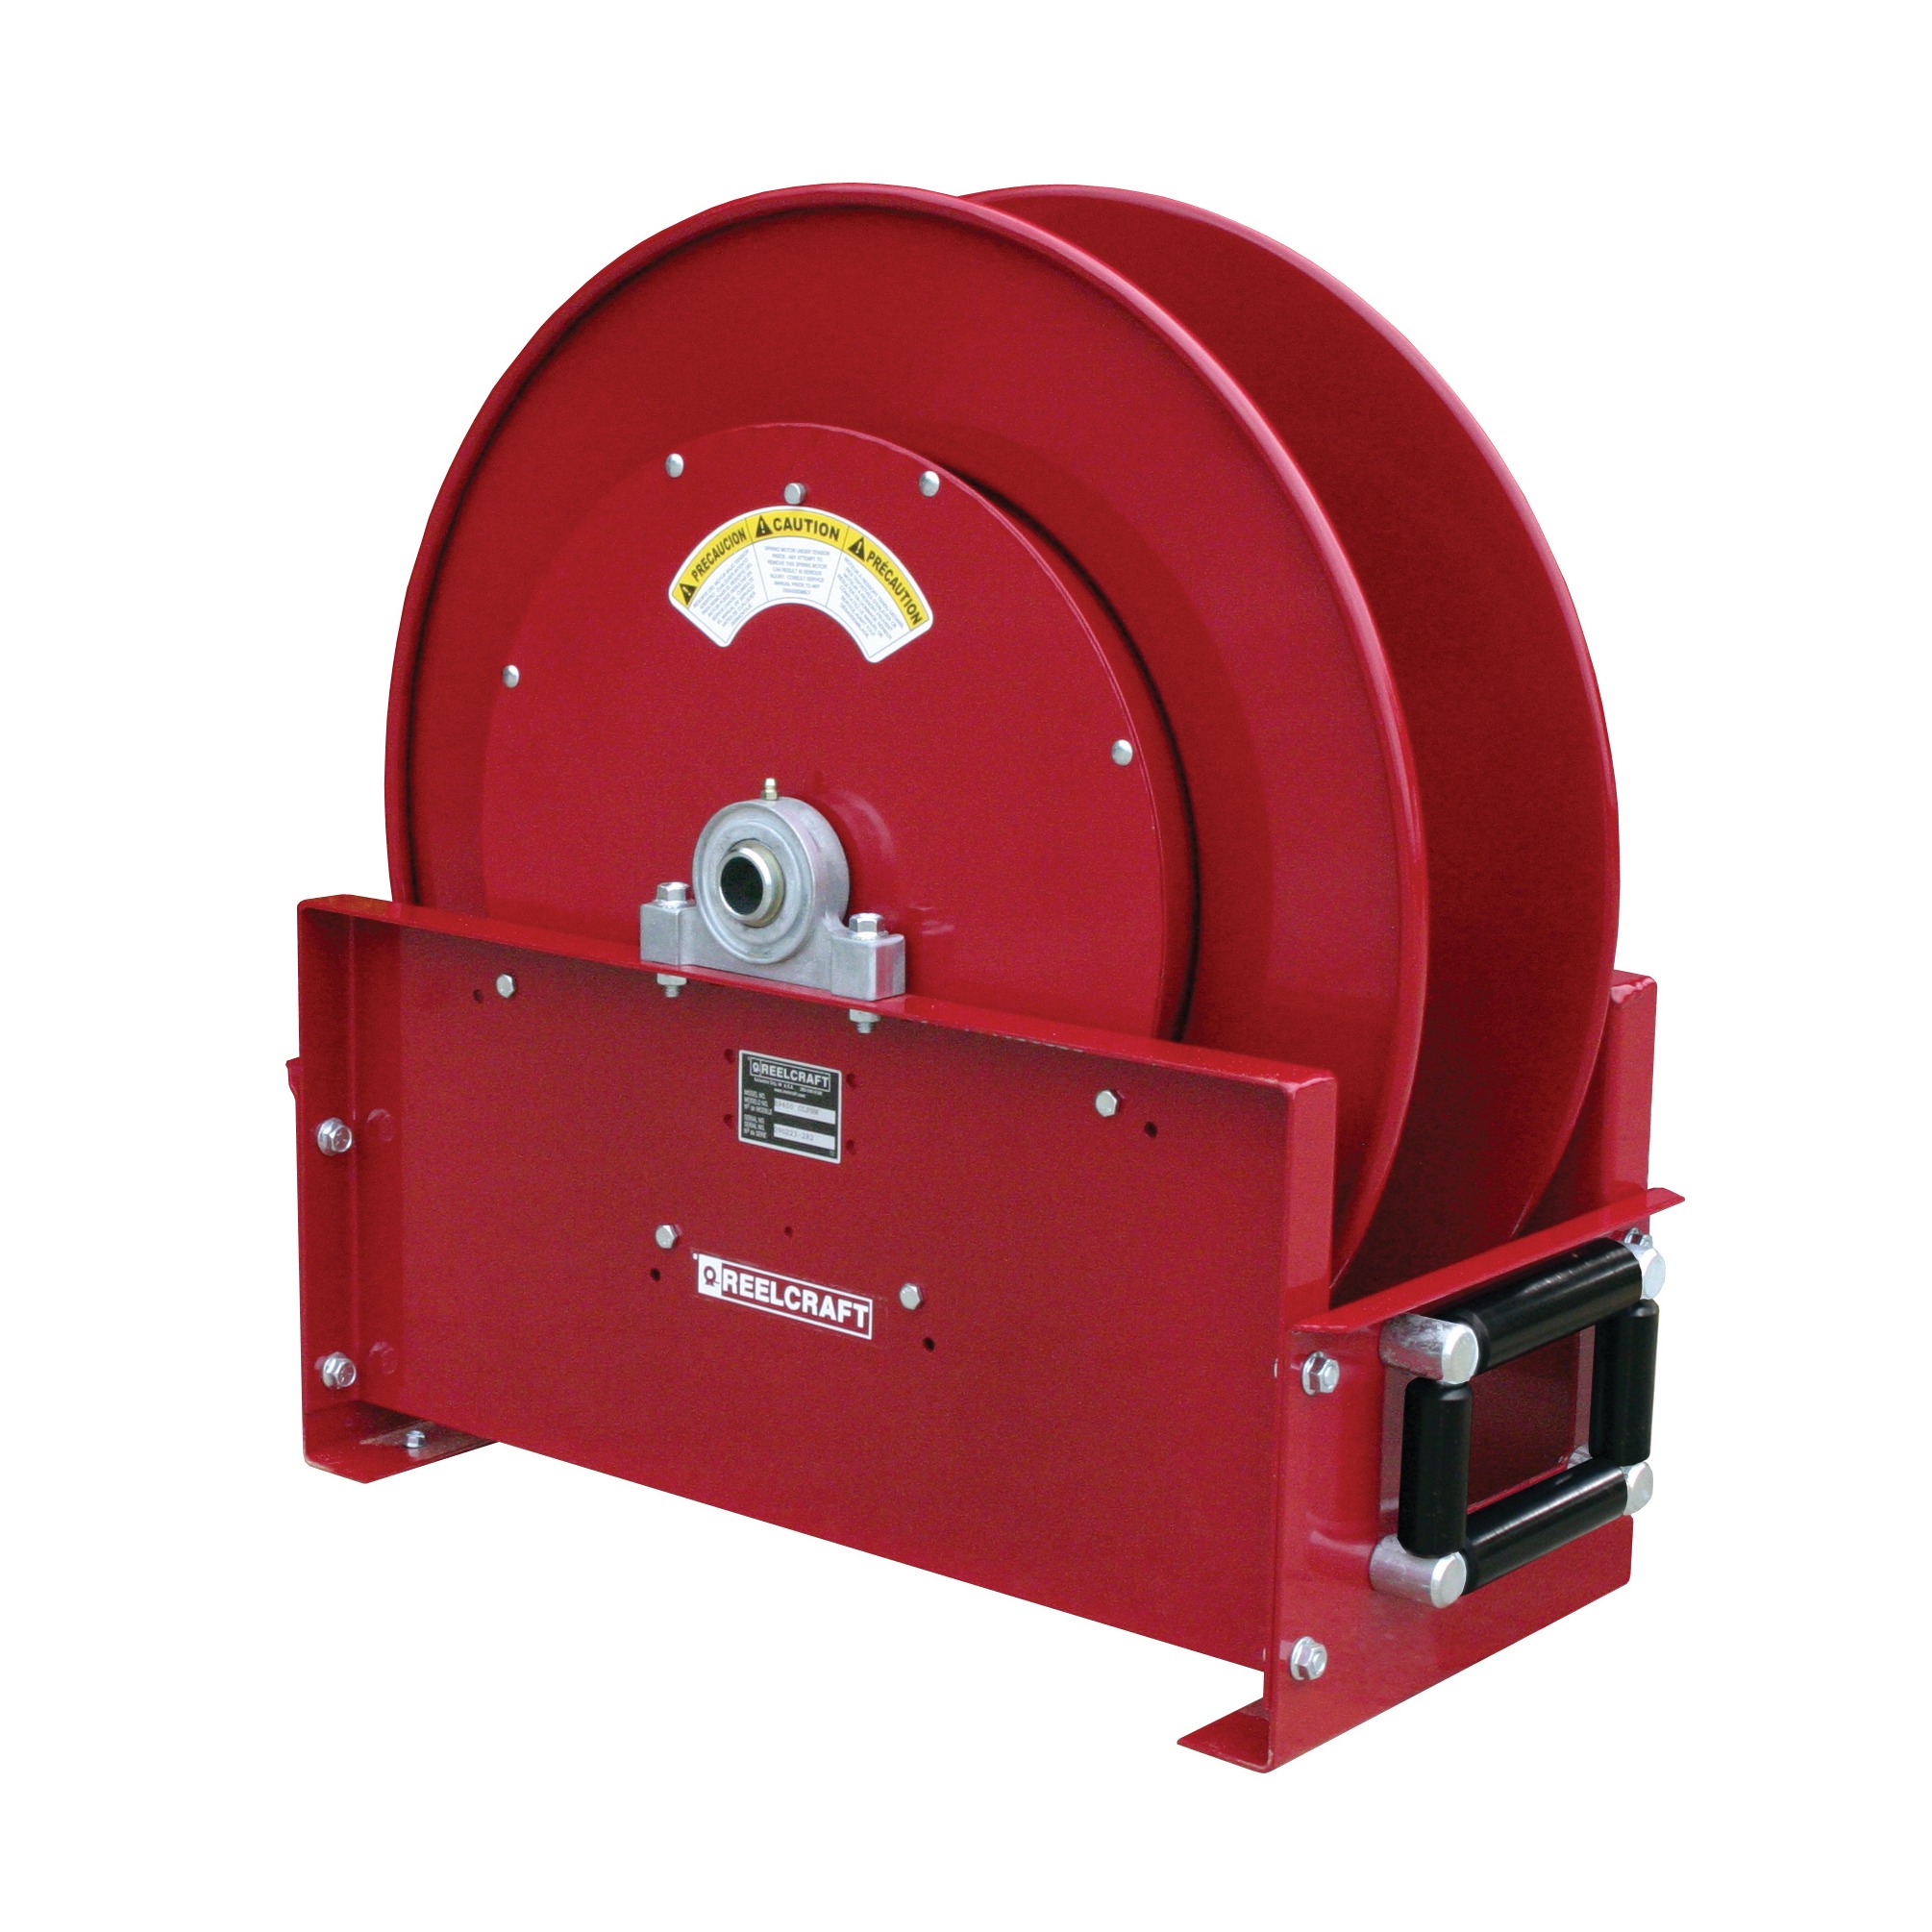 Automatic hose reel for compressed air distribution - Kiro Concept